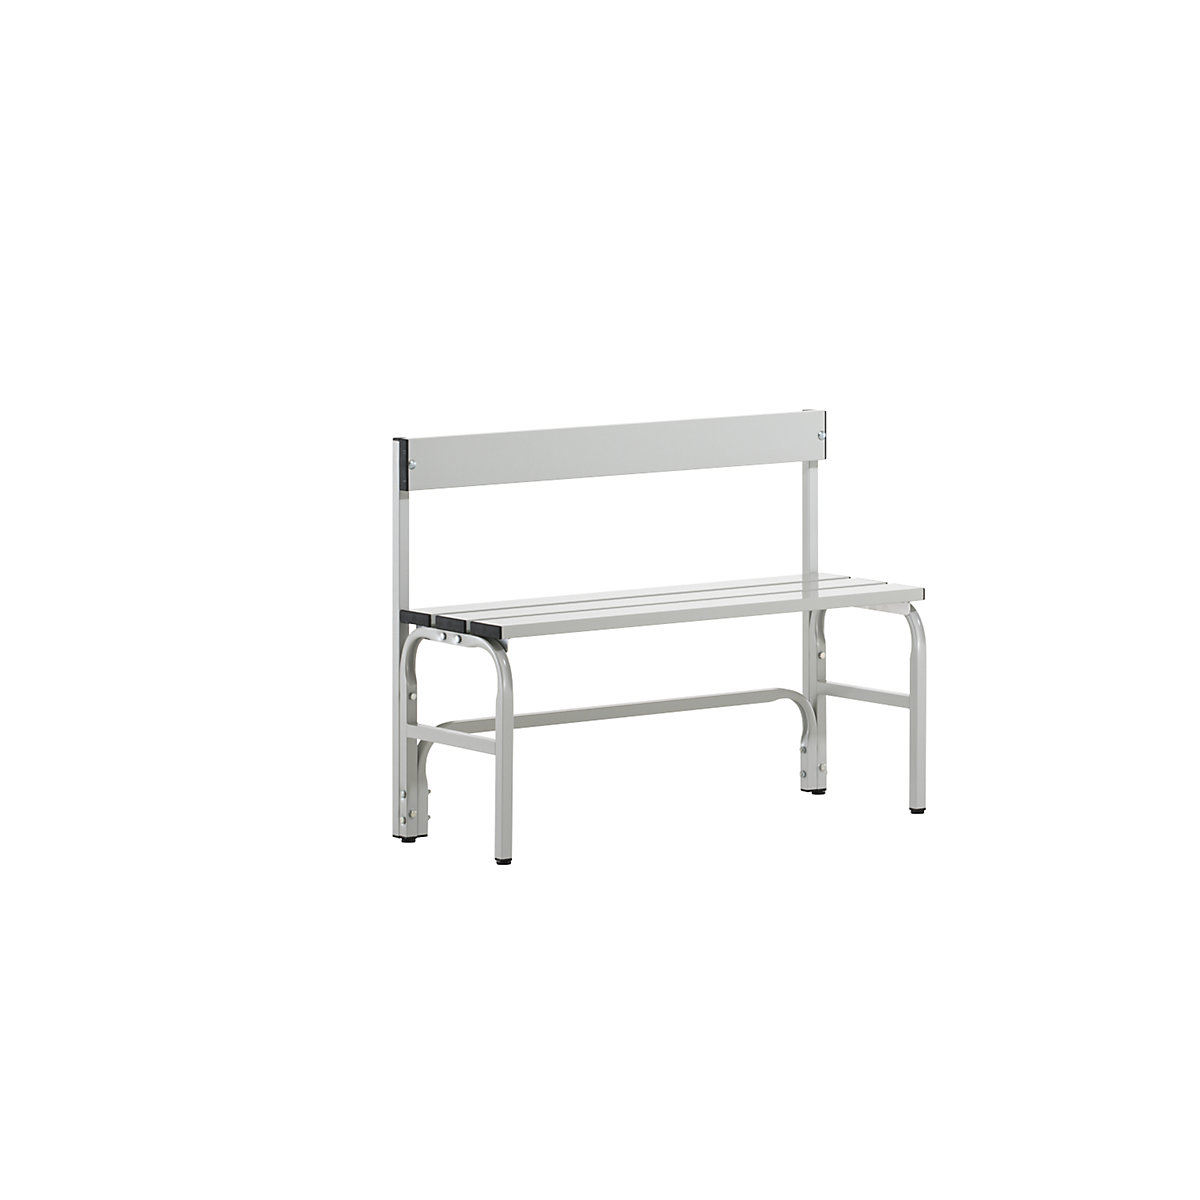 Half height cloakroom bench with back rest, single-sided – Sypro